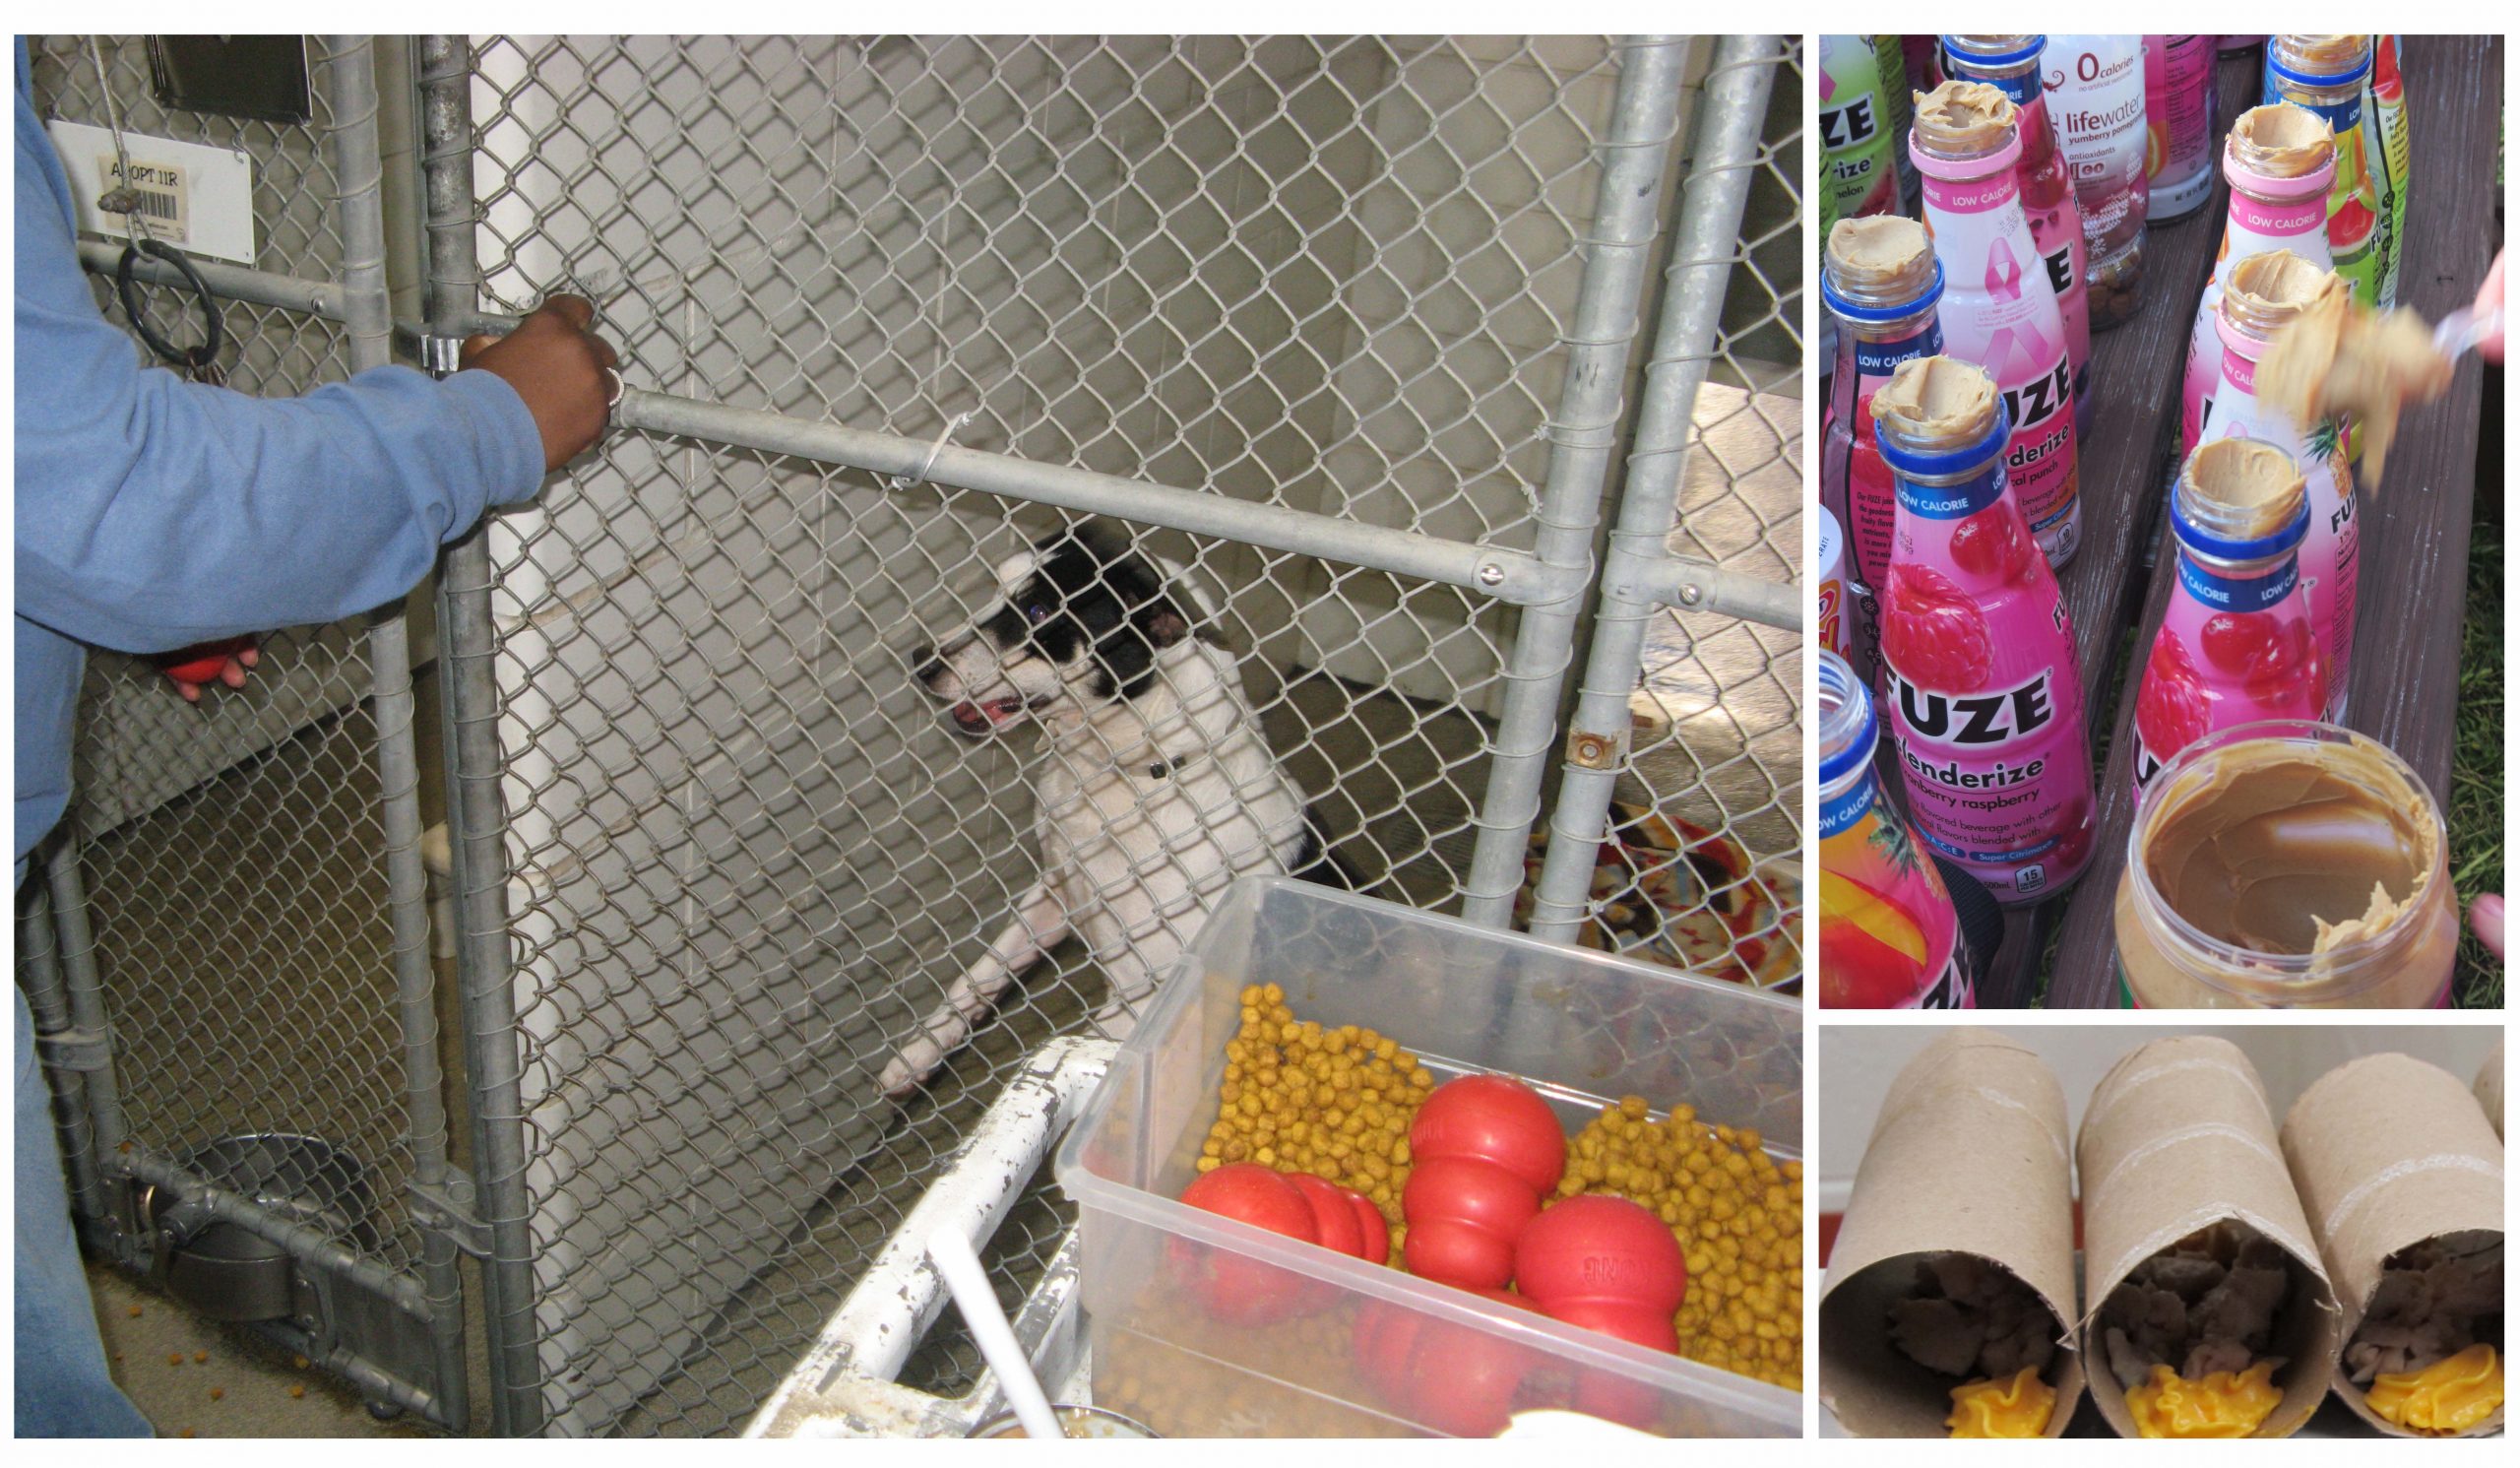 (Left) a caregiver delivers a food stuffed Kong to an eager dog in a run; (Top Right) Empty soda bottles filled with treats and smeared with peanut butter inside the tops; (Bottom right) Empty paper rolls filled with treats and soft spreadable cheese